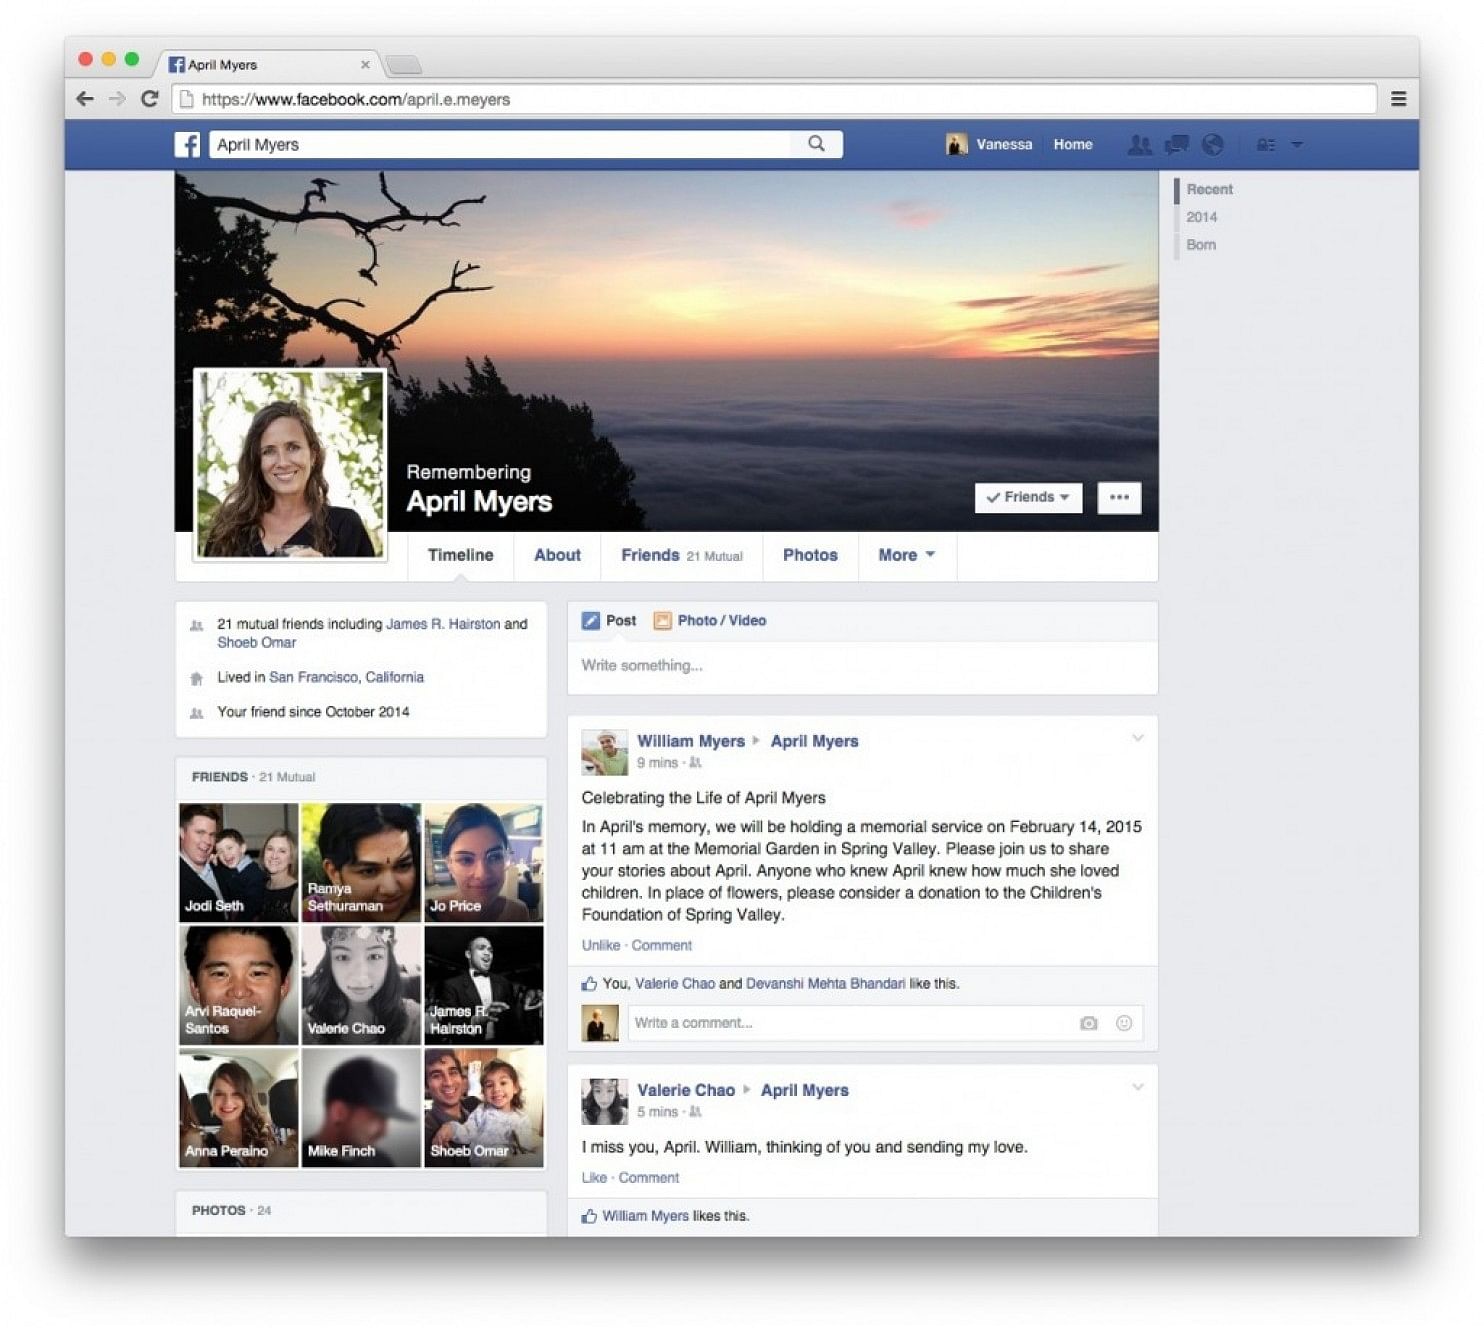 This is what the Facebook timeline may look like once the user passes away. Photo: The Washington Post